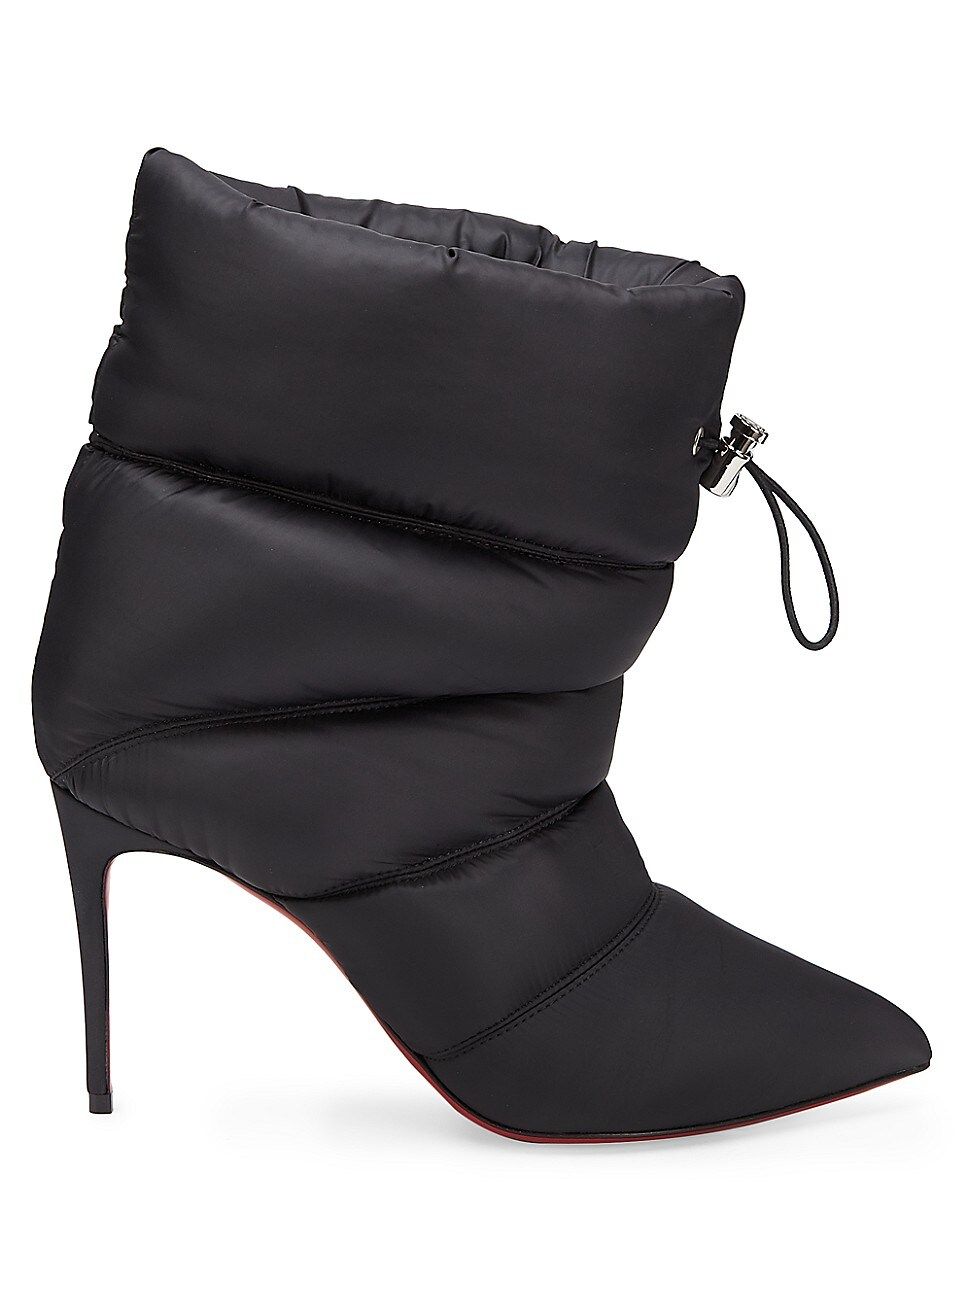 Christian Louboutin Women's Astro Pointue Quilted Ankle Boots - Black - Size 6 | Saks Fifth Avenue